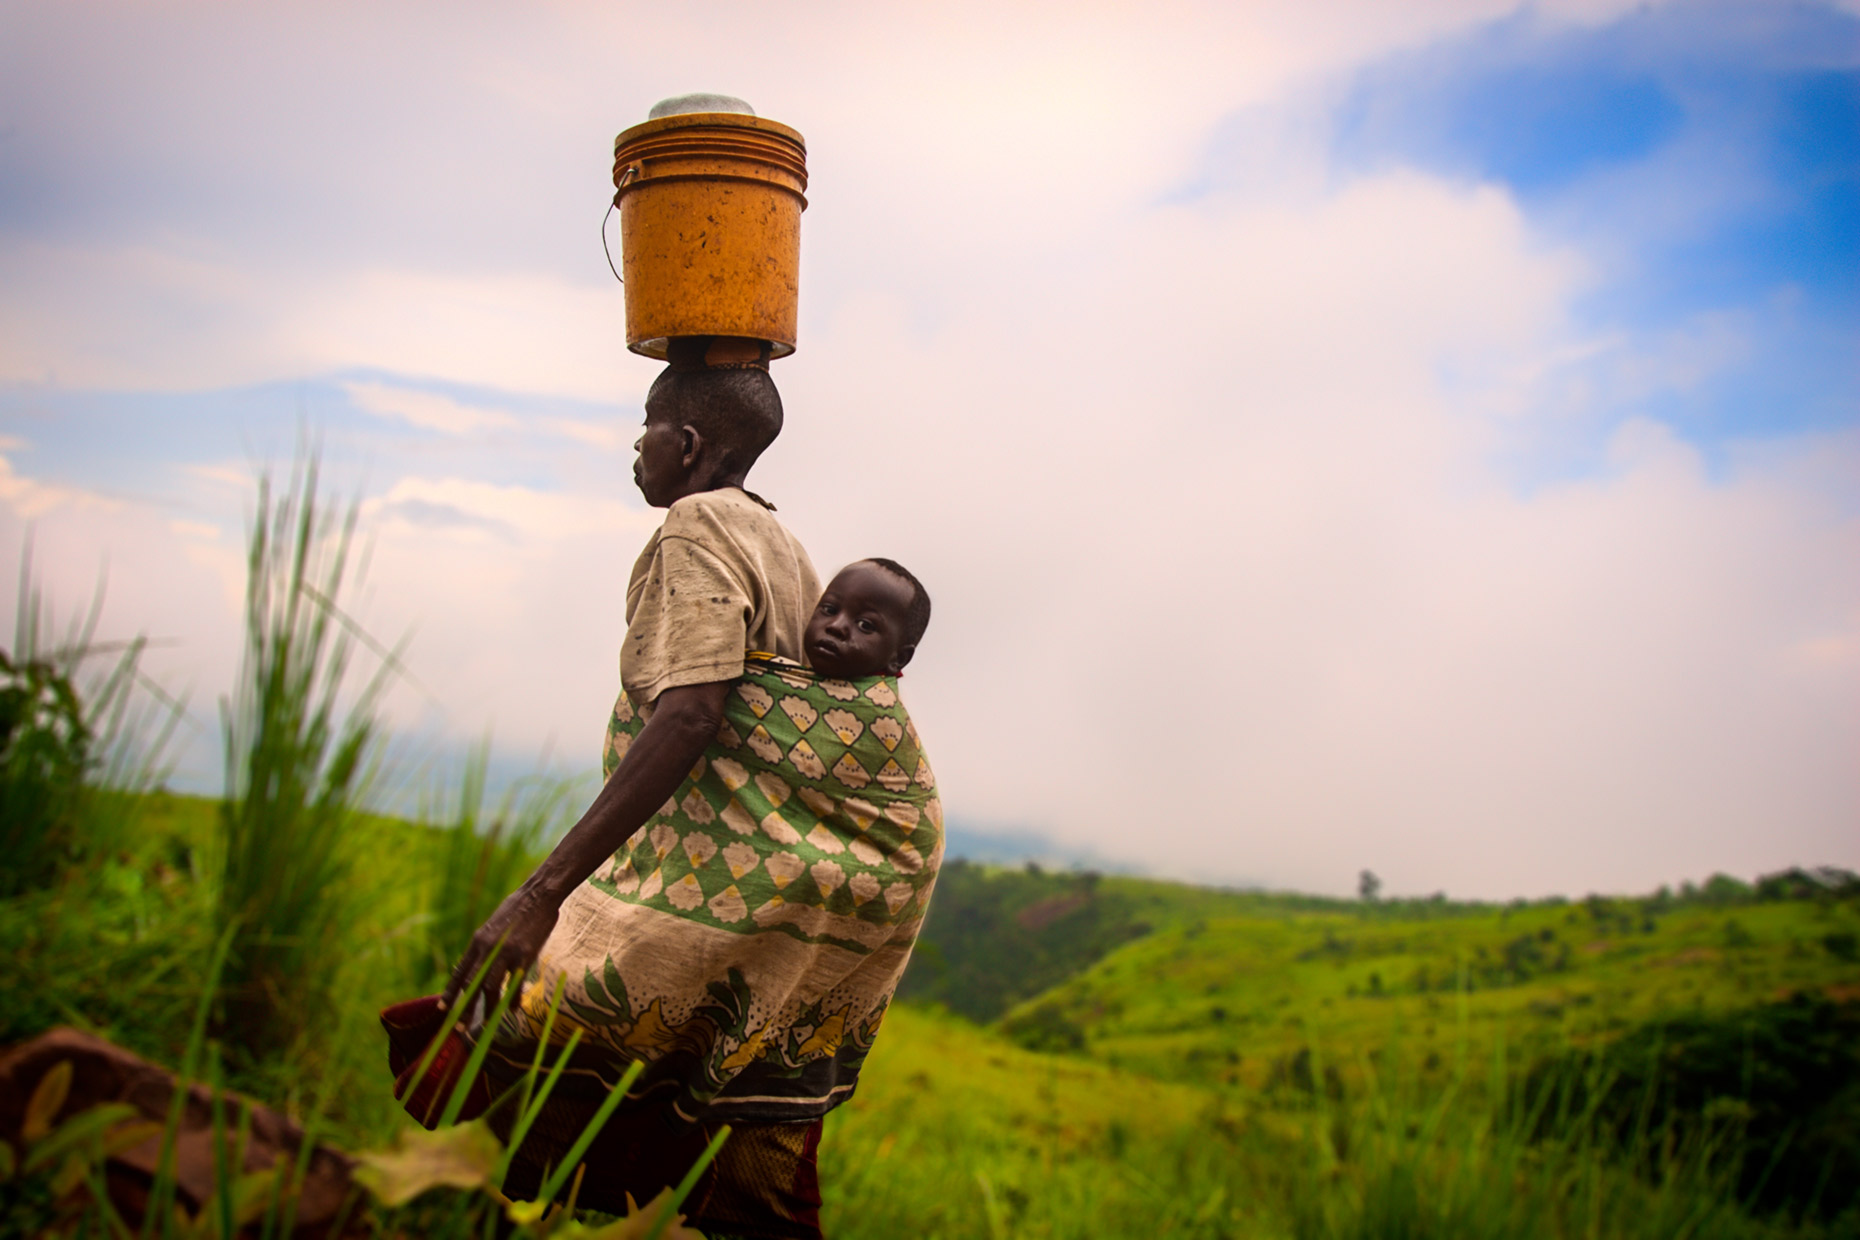 Tanzanian mother with baby carrying water bucket. Agriculture photography